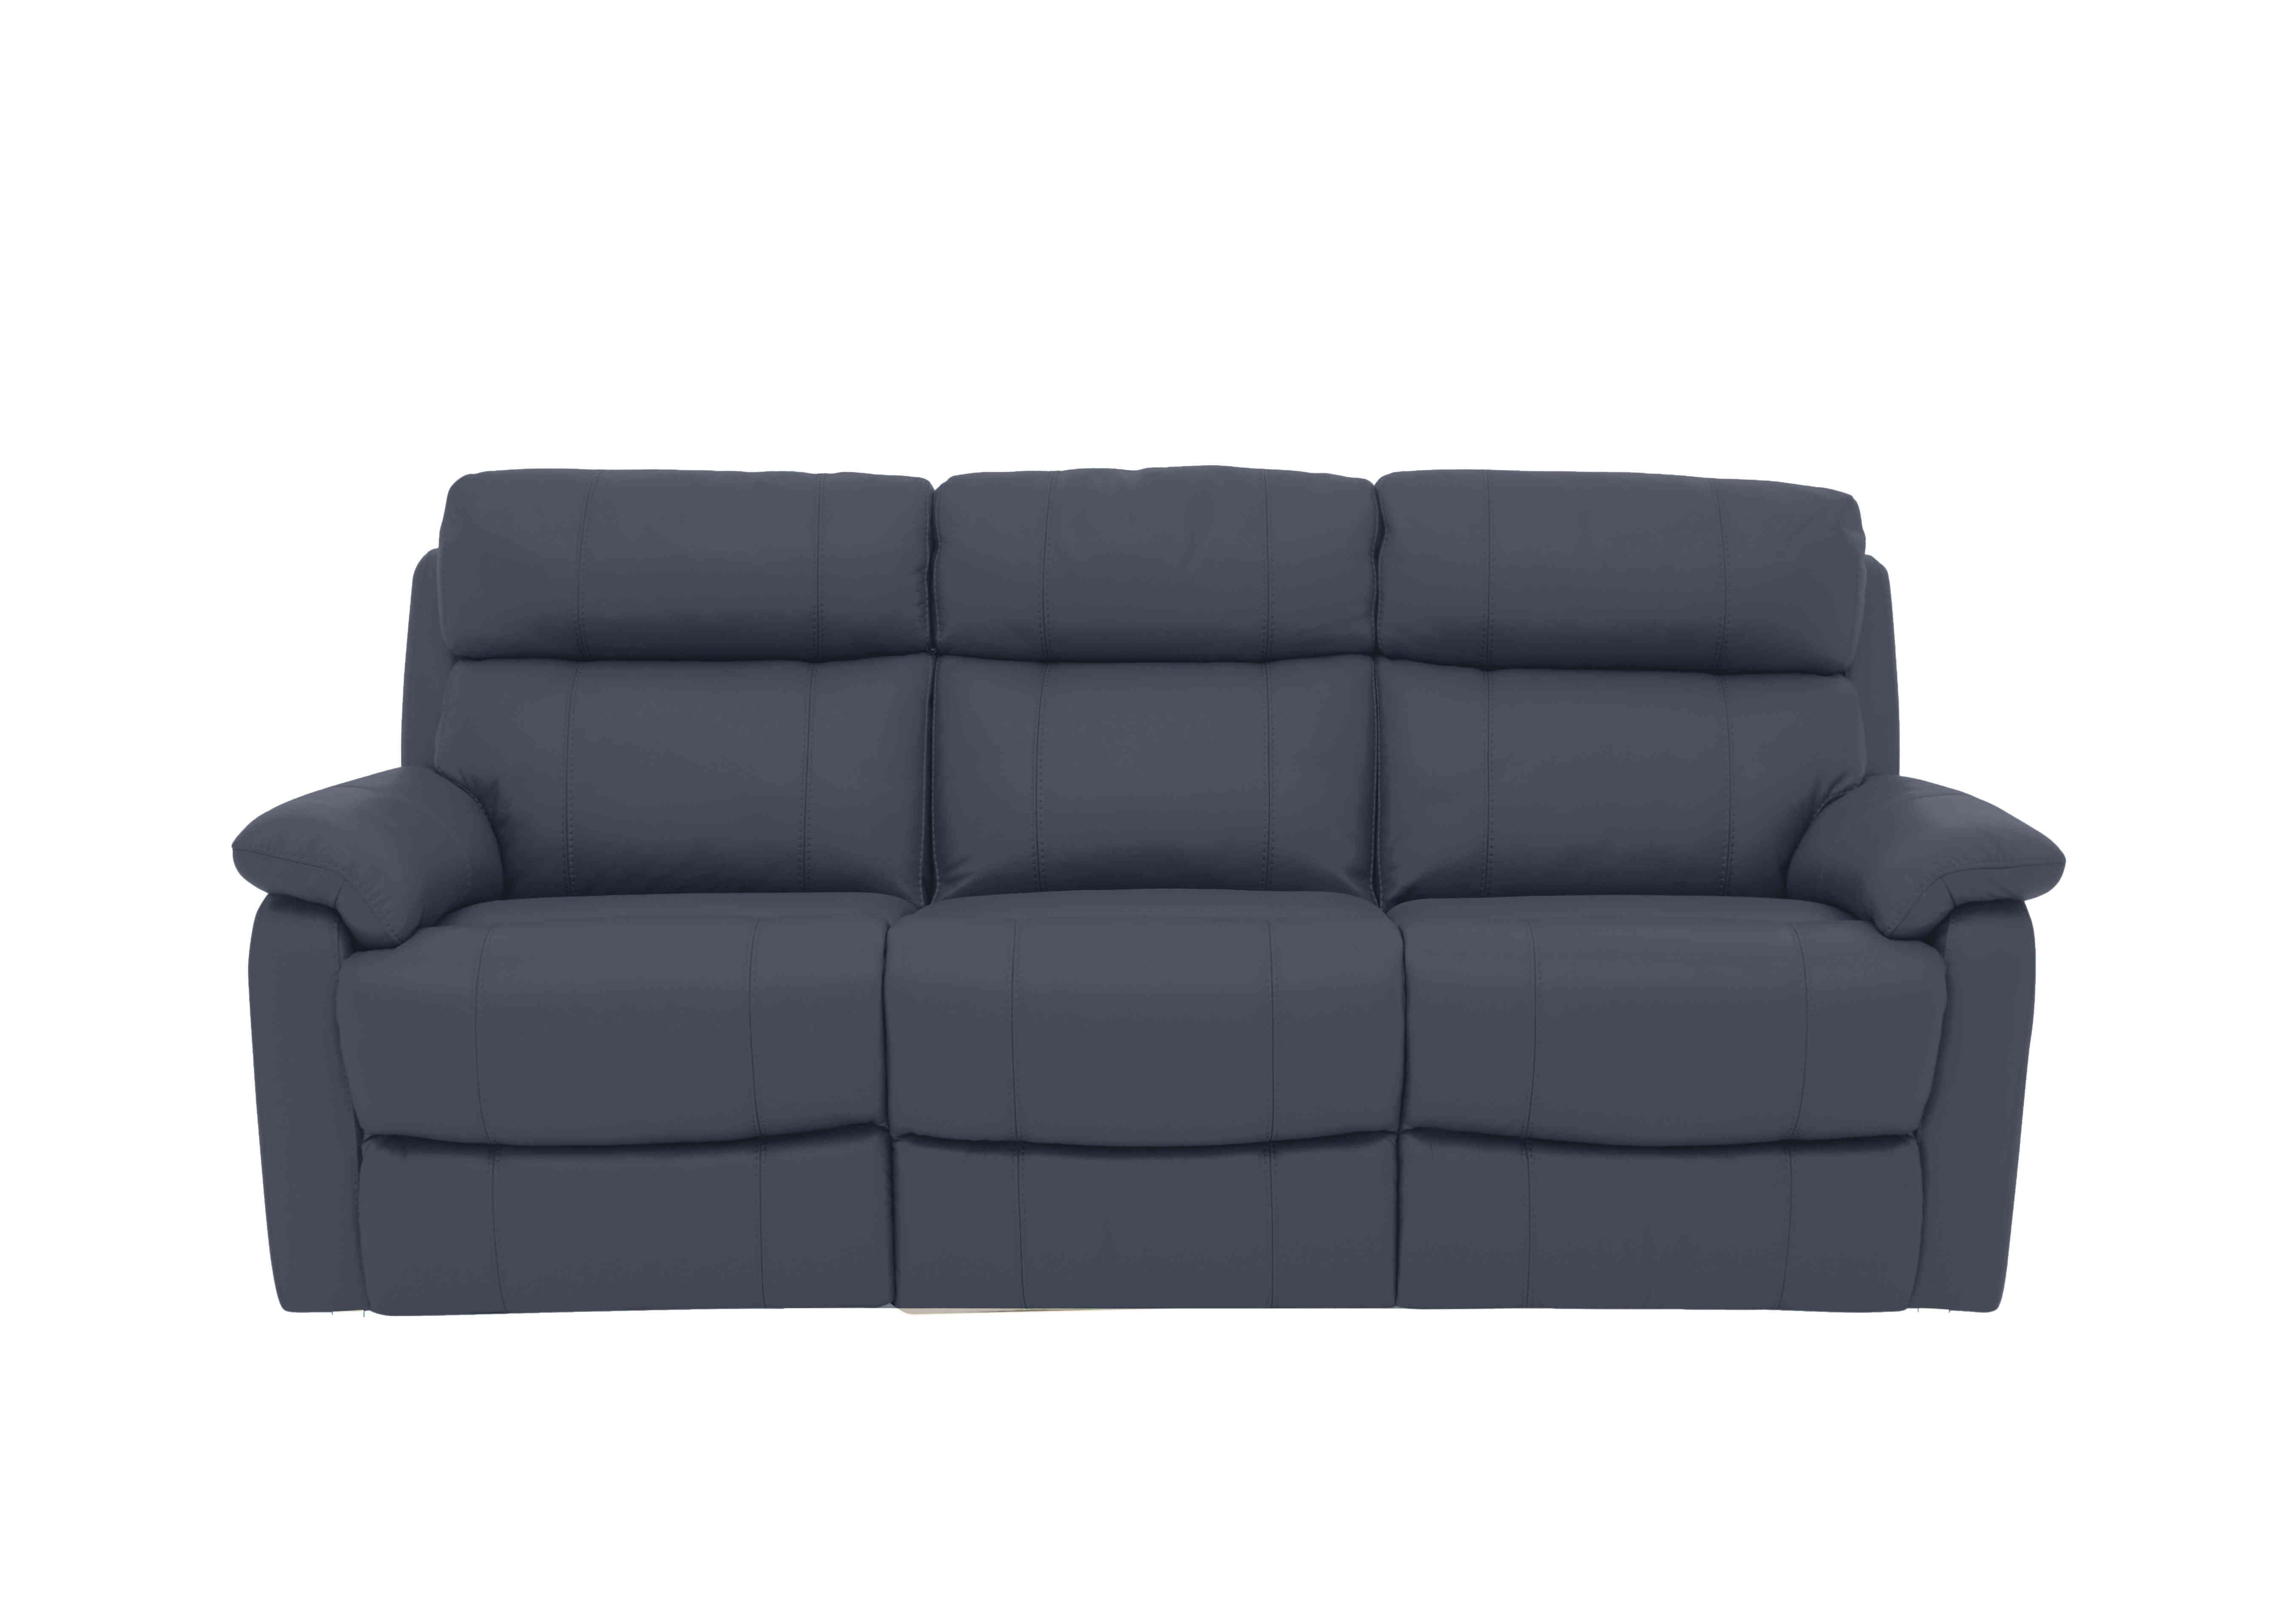 Relax Station Komodo 3 Seater Leather Sofa with Power Headrests and Cup Holders in Bv-313e Ocean Blue on Furniture Village